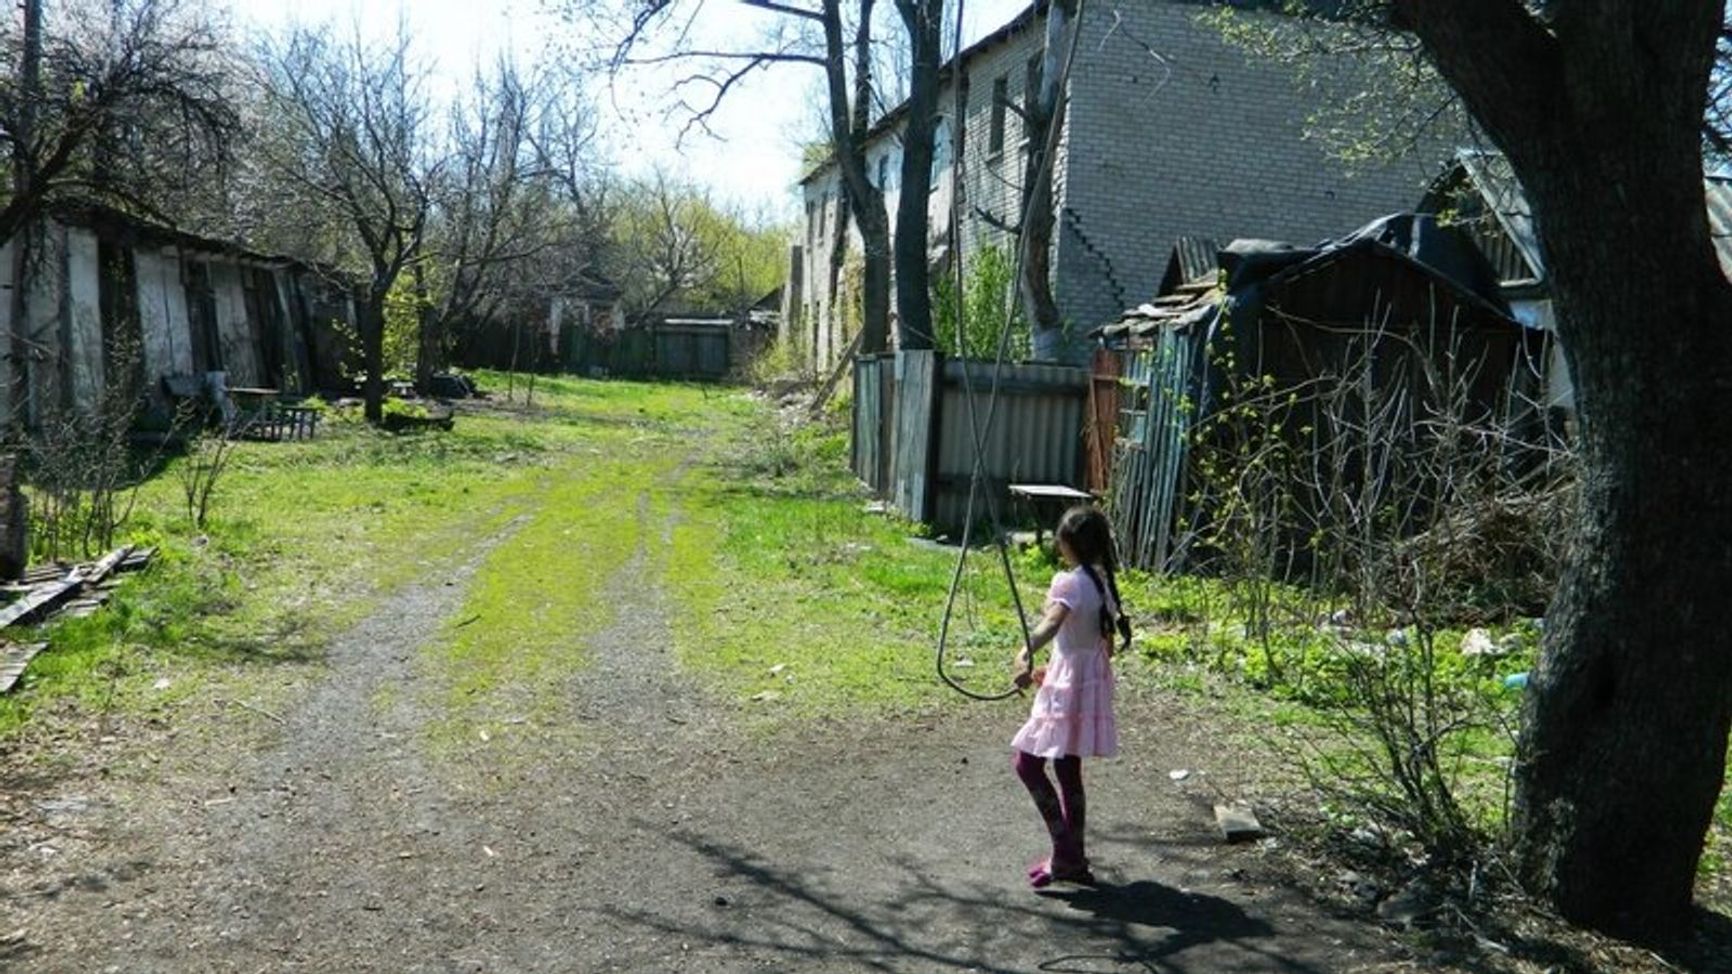 In the village of Snizhne, the Romani community settled in the abandoned houses left behind by the miners